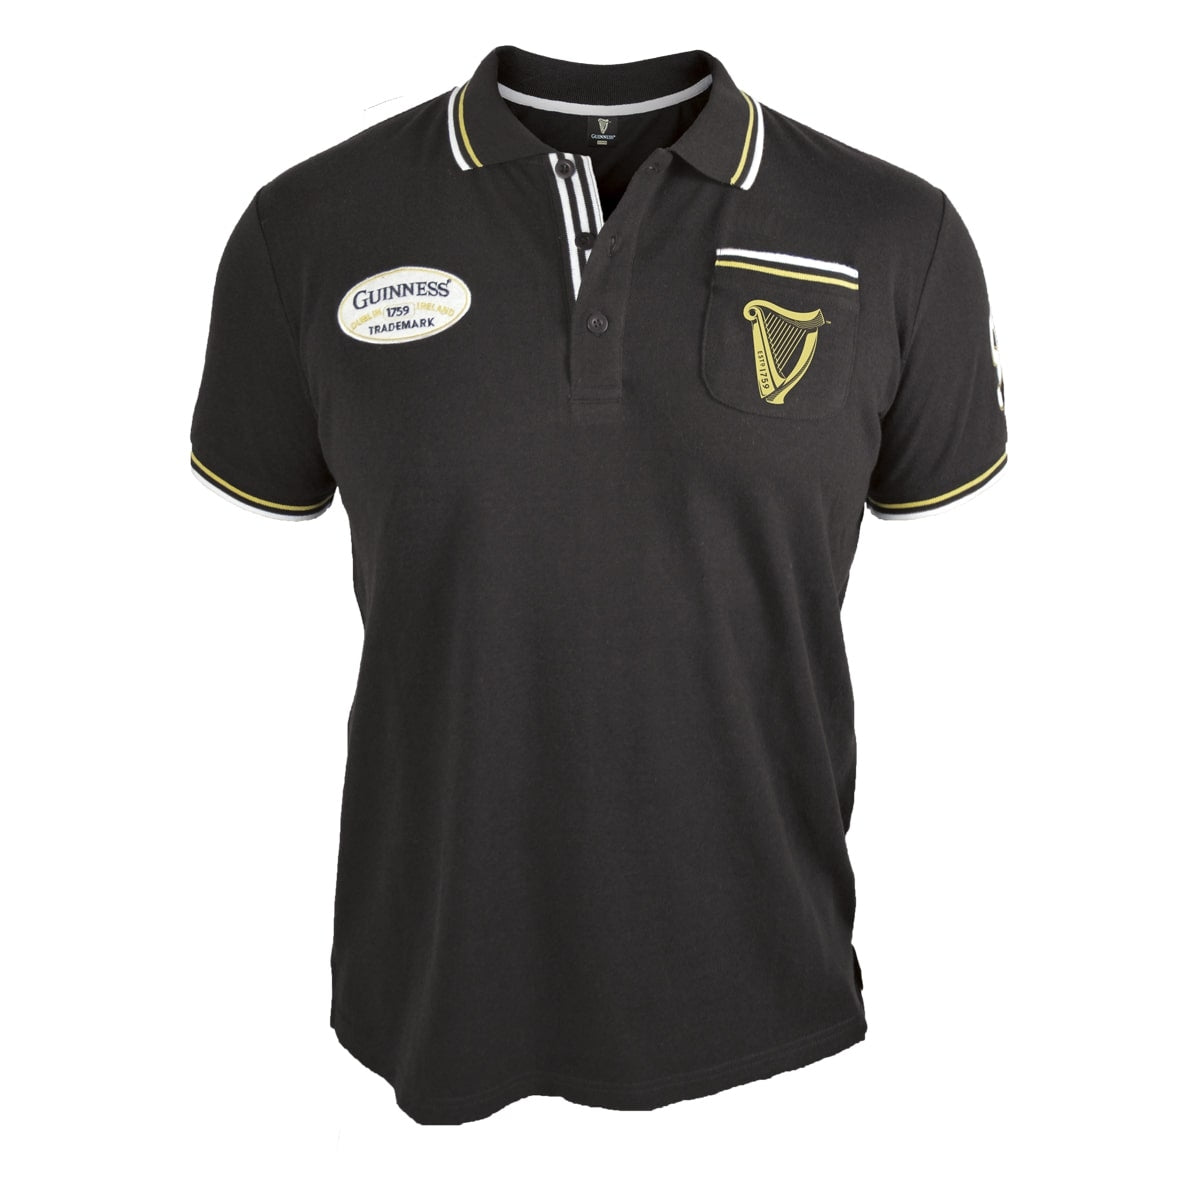 A Guinness Black Pique Polo Shirt with the Irish flag on it.